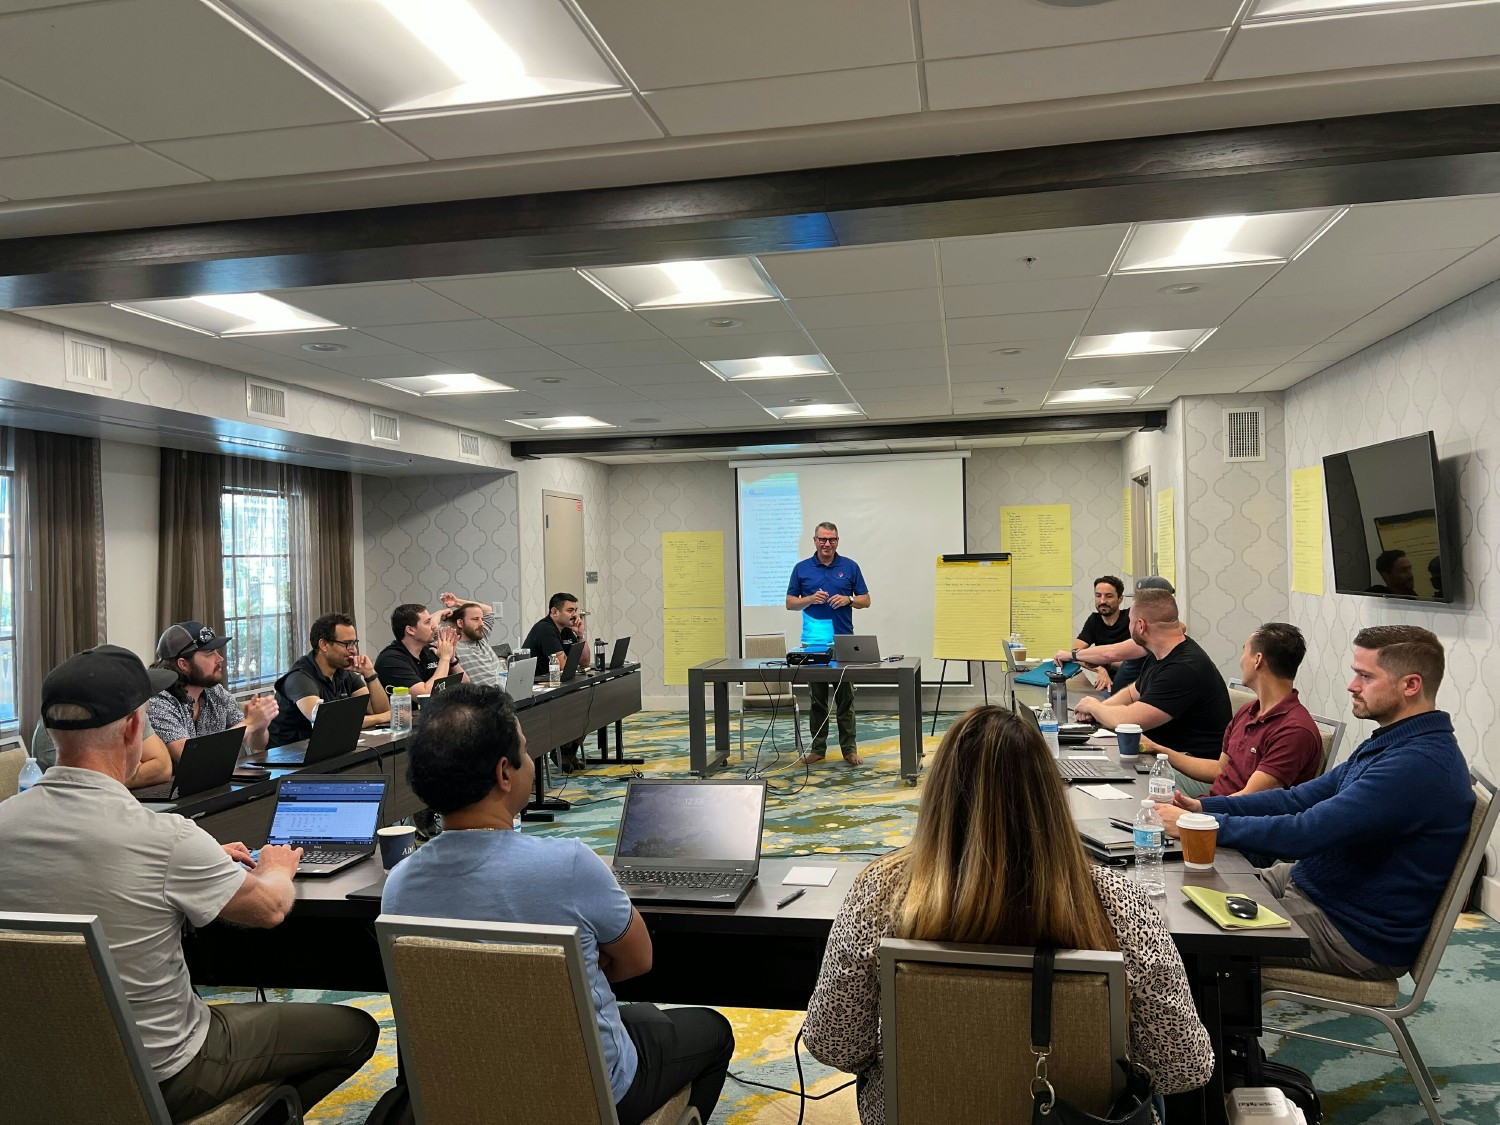 Operations and leadership teams hammering out company direction and priorities at one of our quarterly offsite meetings.